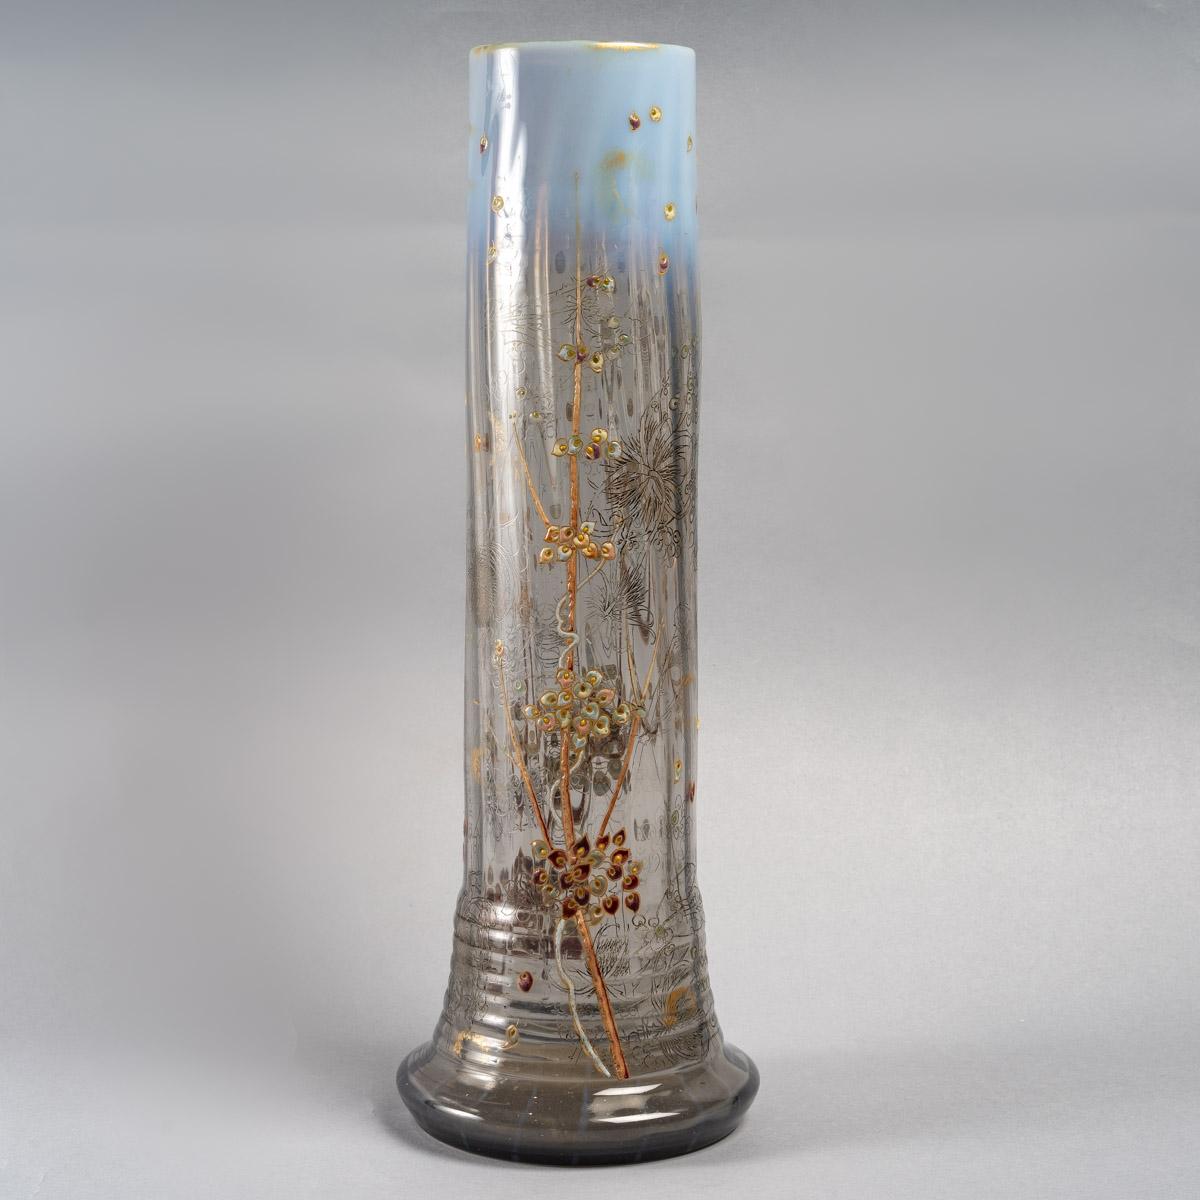 Late 19th Century Emile Gallé Vase Grey & Opalescent Glass Engraved Thistles Enameled Snowberries